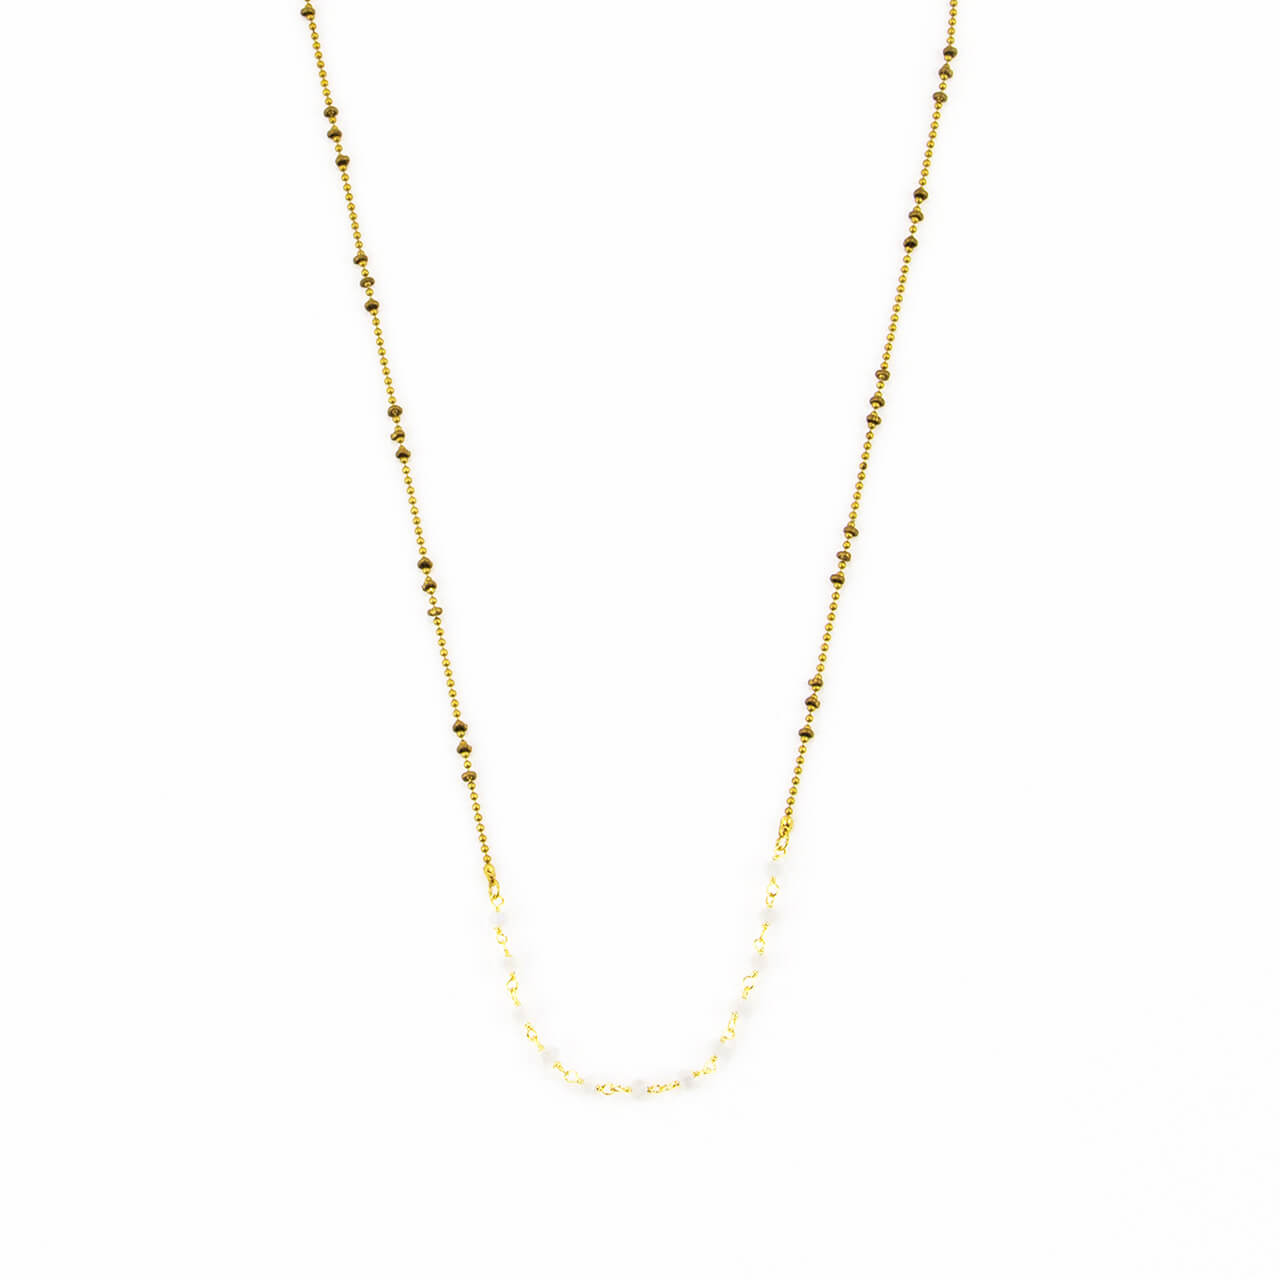 Eleanor Necklace: Simple Rosary Chain Necklace